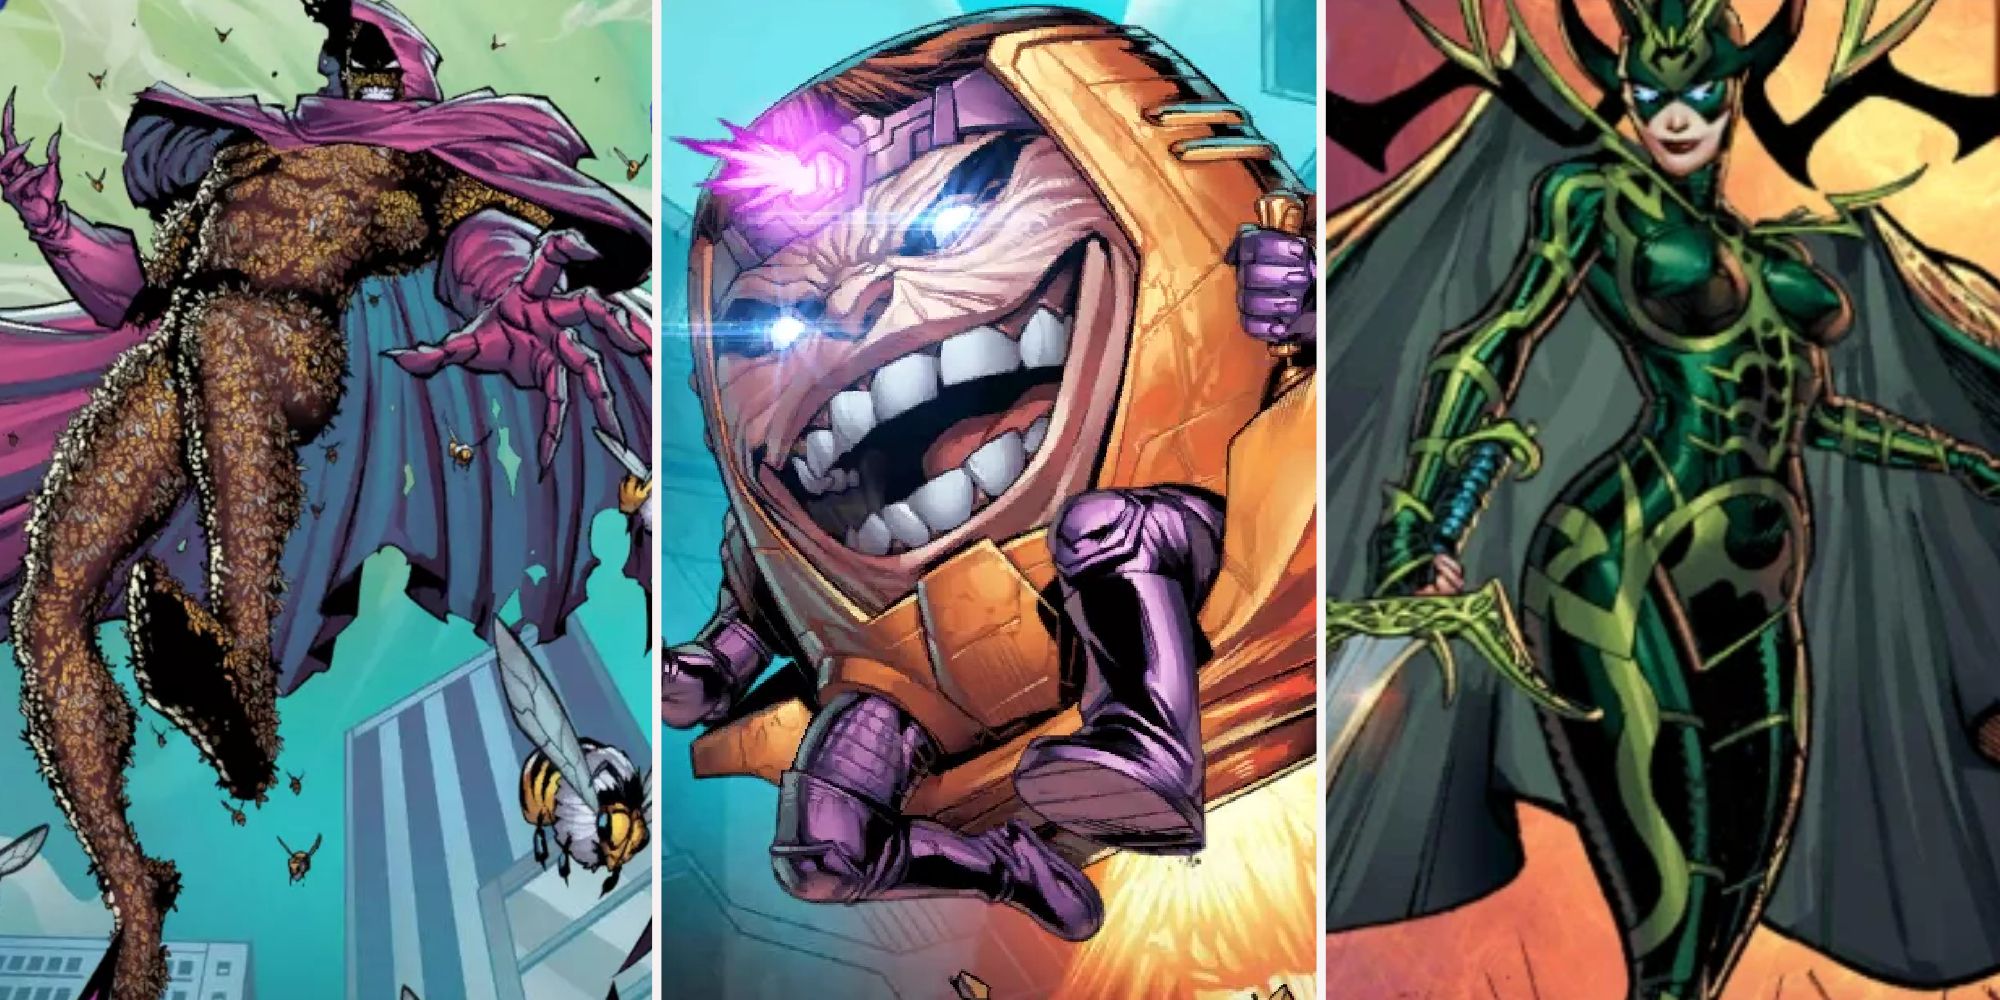 Swarm, Modok, and Hela from Marvel Snap